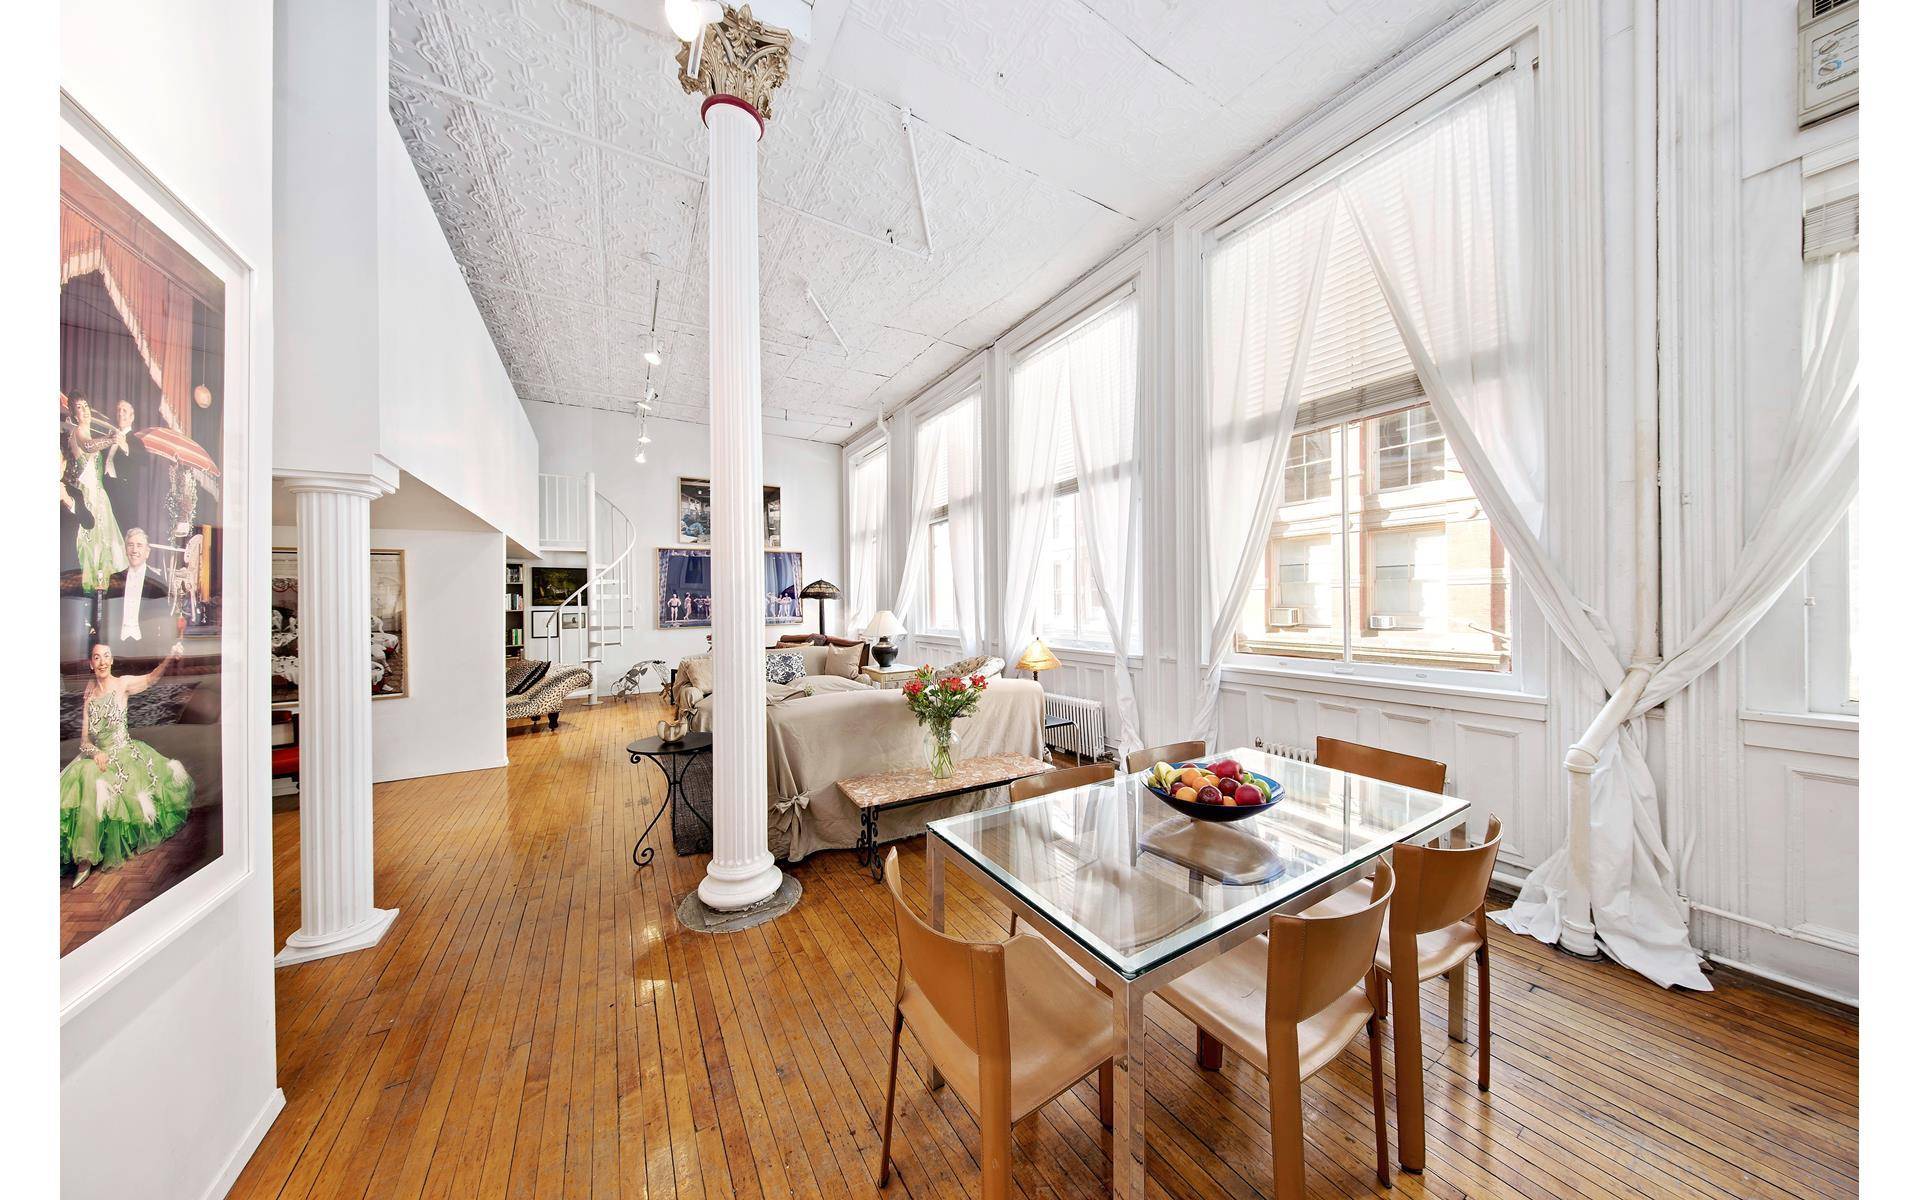 For the first time in almost 50 years comes a once in a lifetime opportunity to purchase this stunning, sun flooded, extra wide, floor through mega loft located on one ...